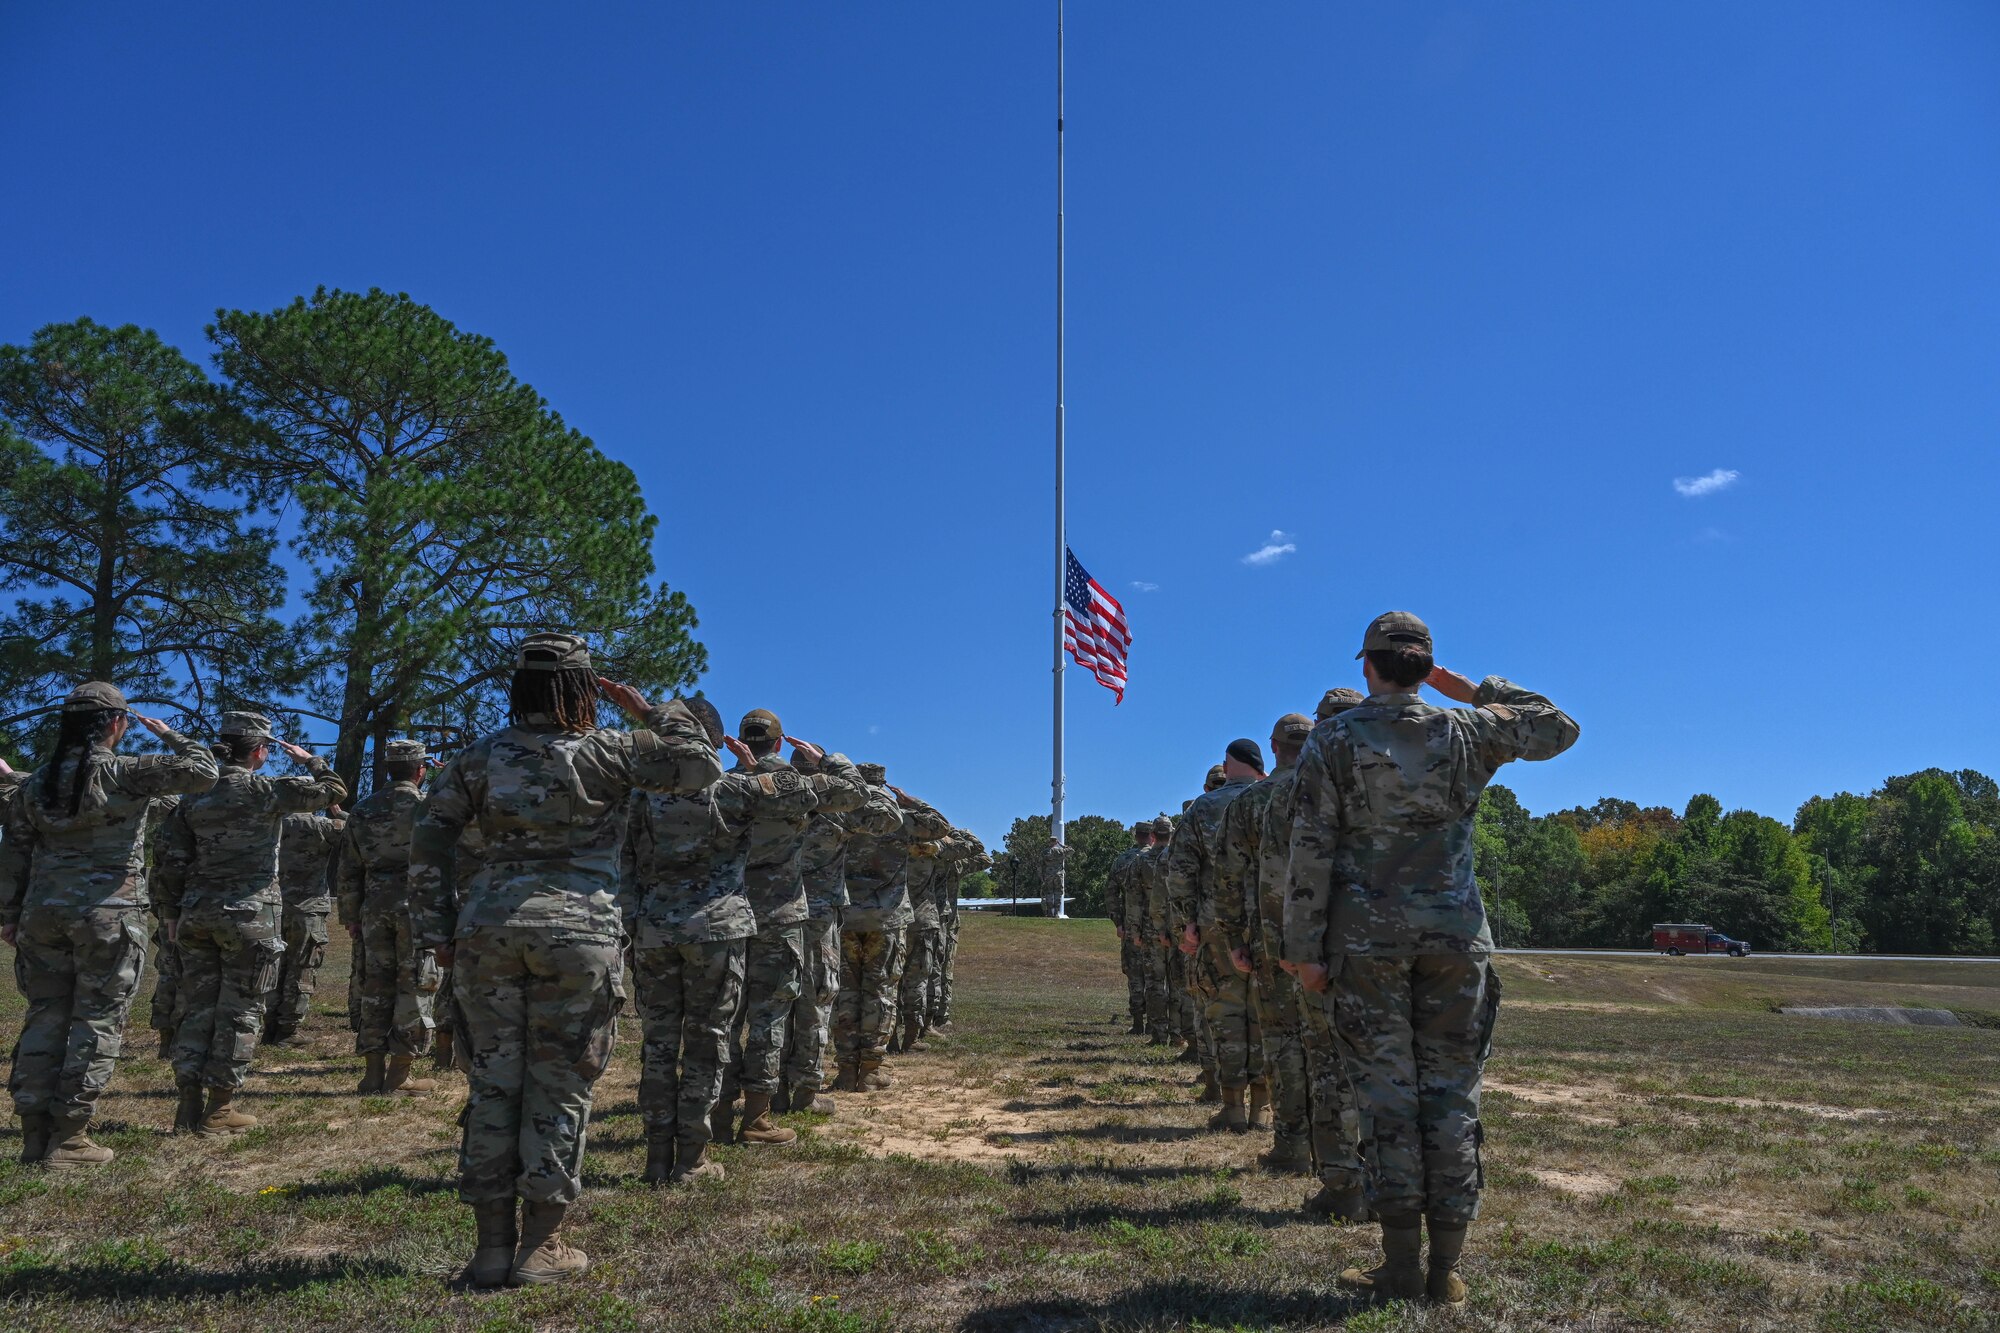 Airmen salute a flag in formation.